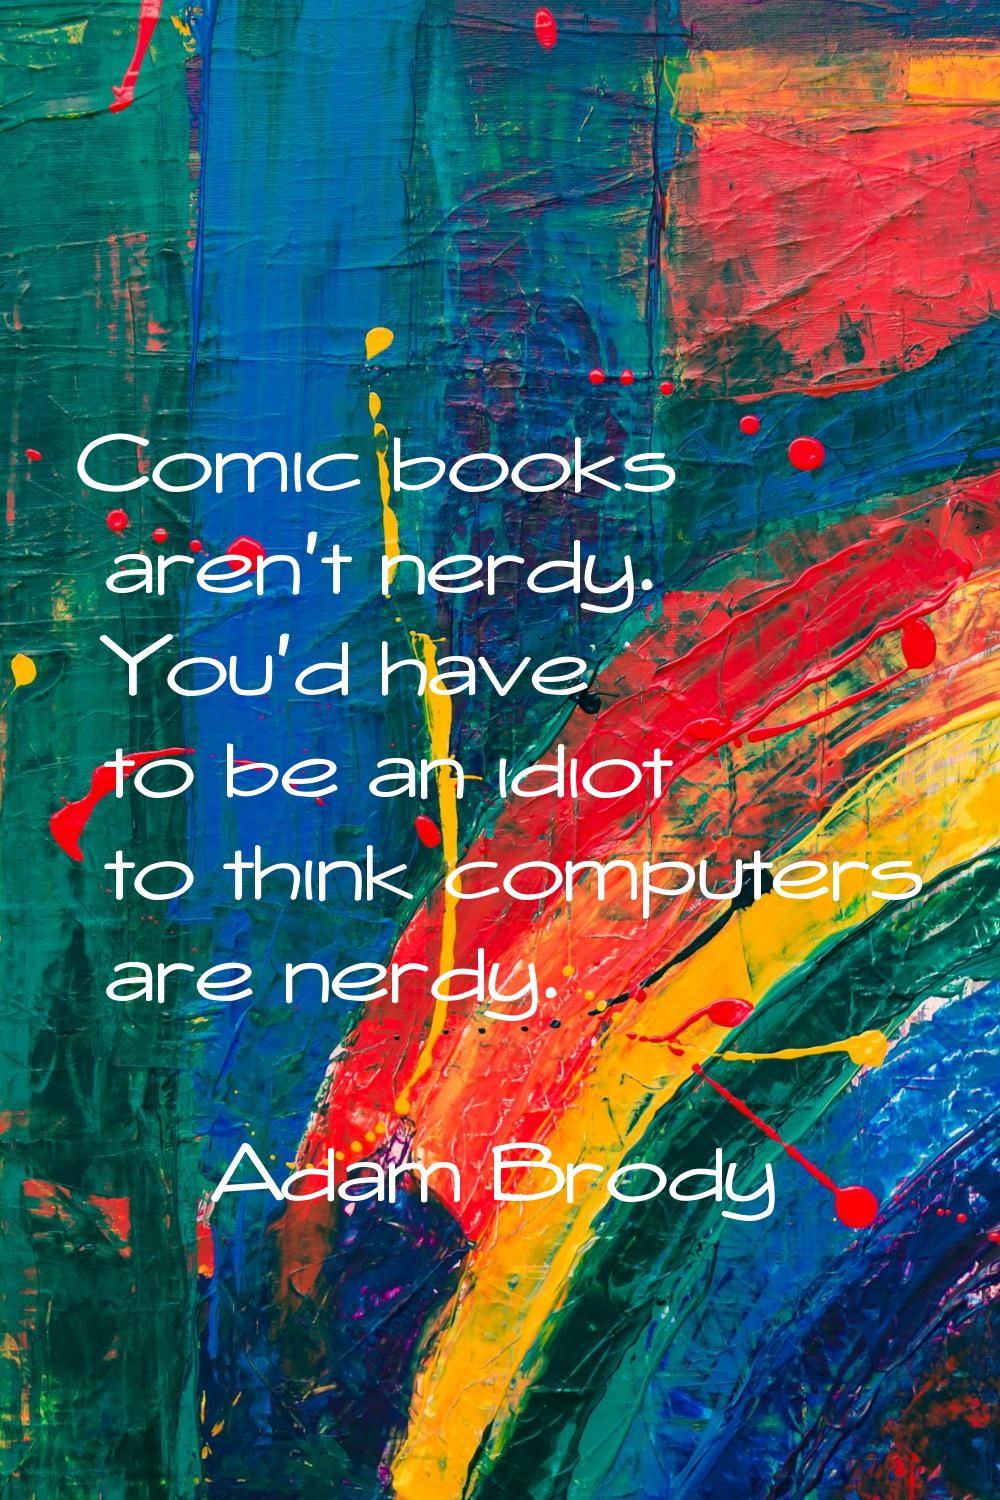 Comic books aren't nerdy. You'd have to be an idiot to think computers are nerdy.